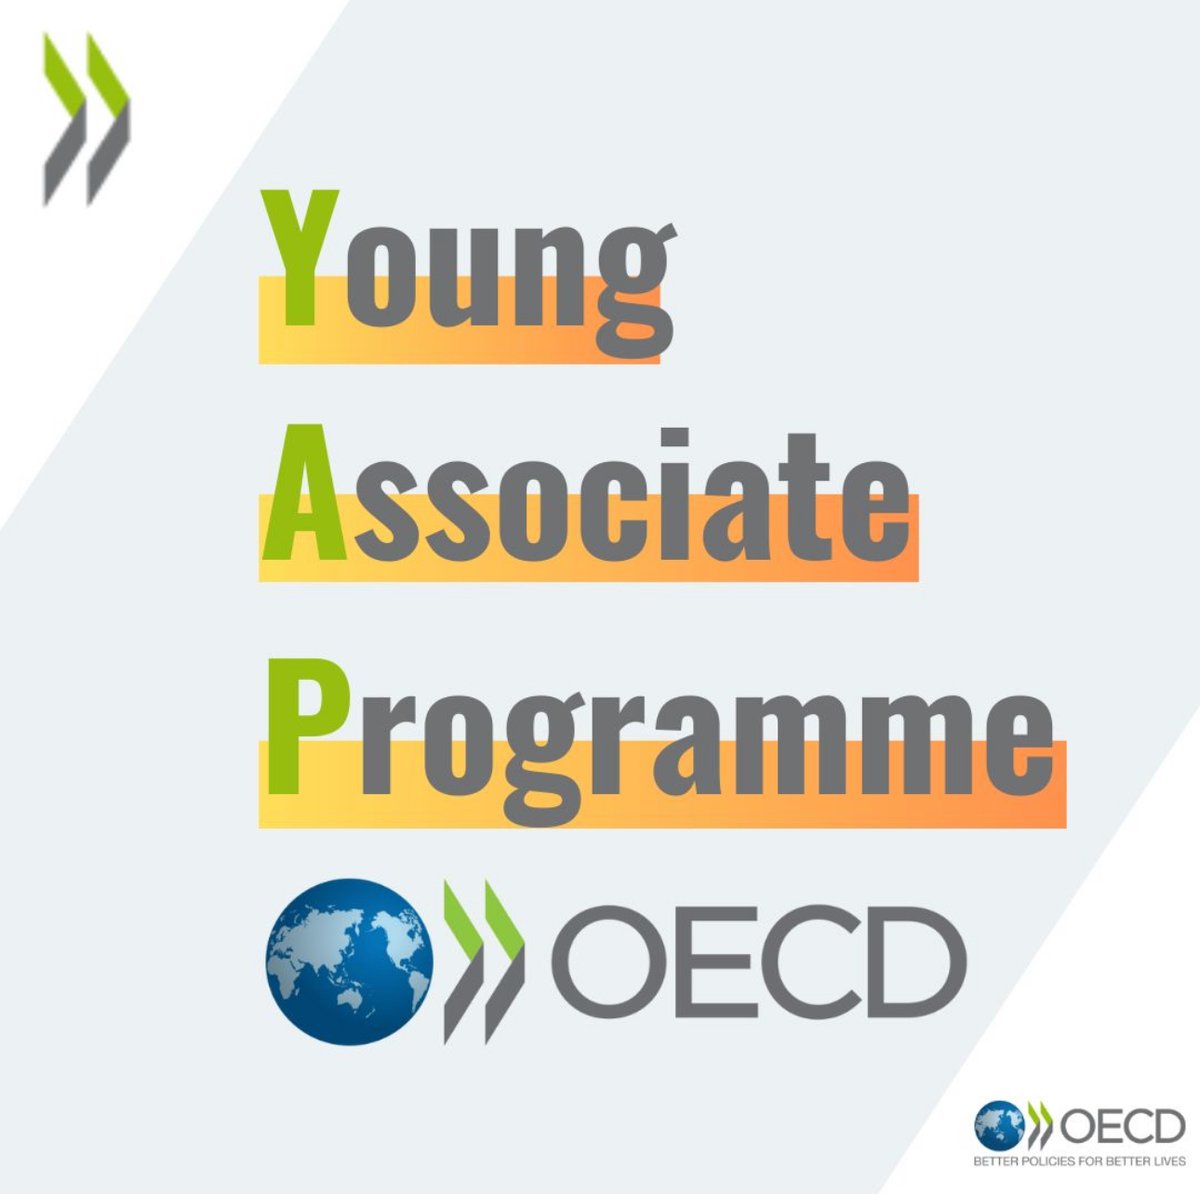 📢 The OECD Young Associates Program is NOW OPEN for applications!

👉 Apply Here: bit.ly/3uLHmUv

#OECDYoungAssociates #InternationalPolicy #CareerOpportunity #RecentGraduates #GlobalImpact #youthdevelopment #ngo #graduates #socialimpact #ngo #youthempoverment